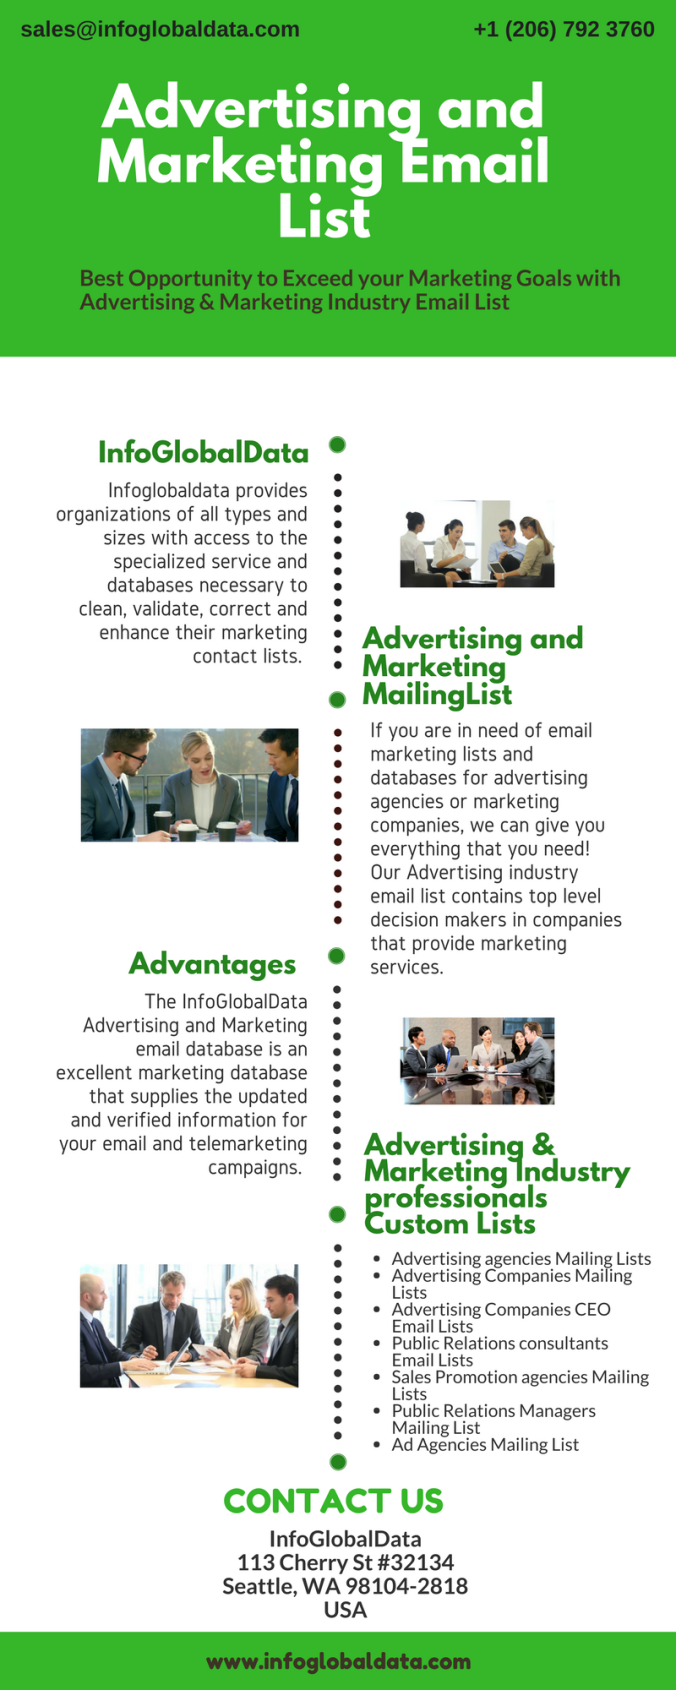 Advertising and Marketing Email List.png